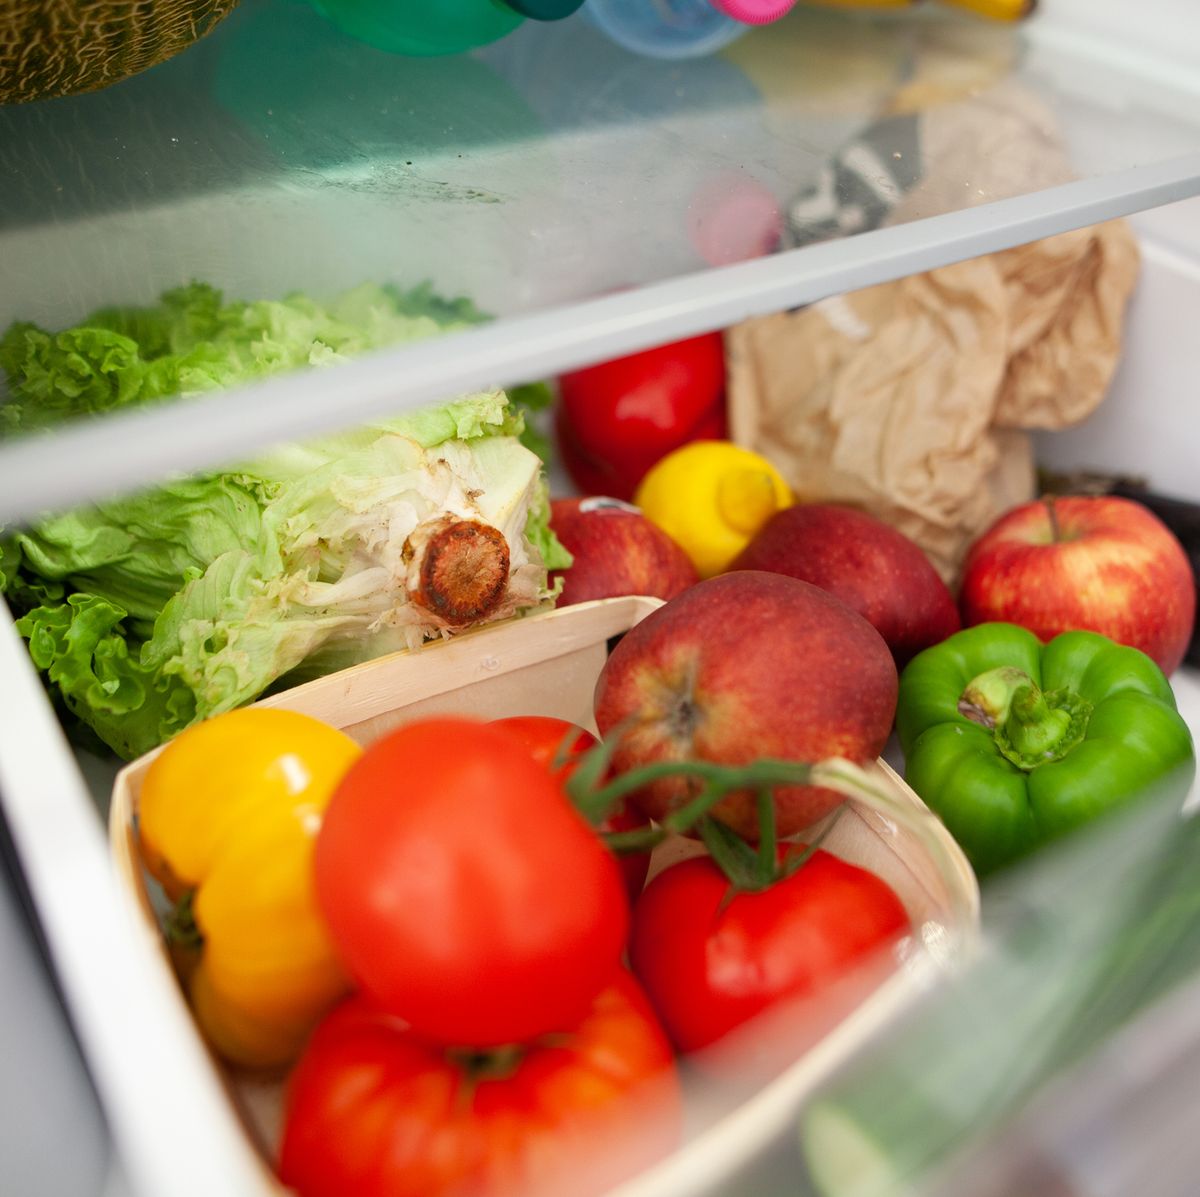 Are Fridge Drawers For Fruits And Vegetables?